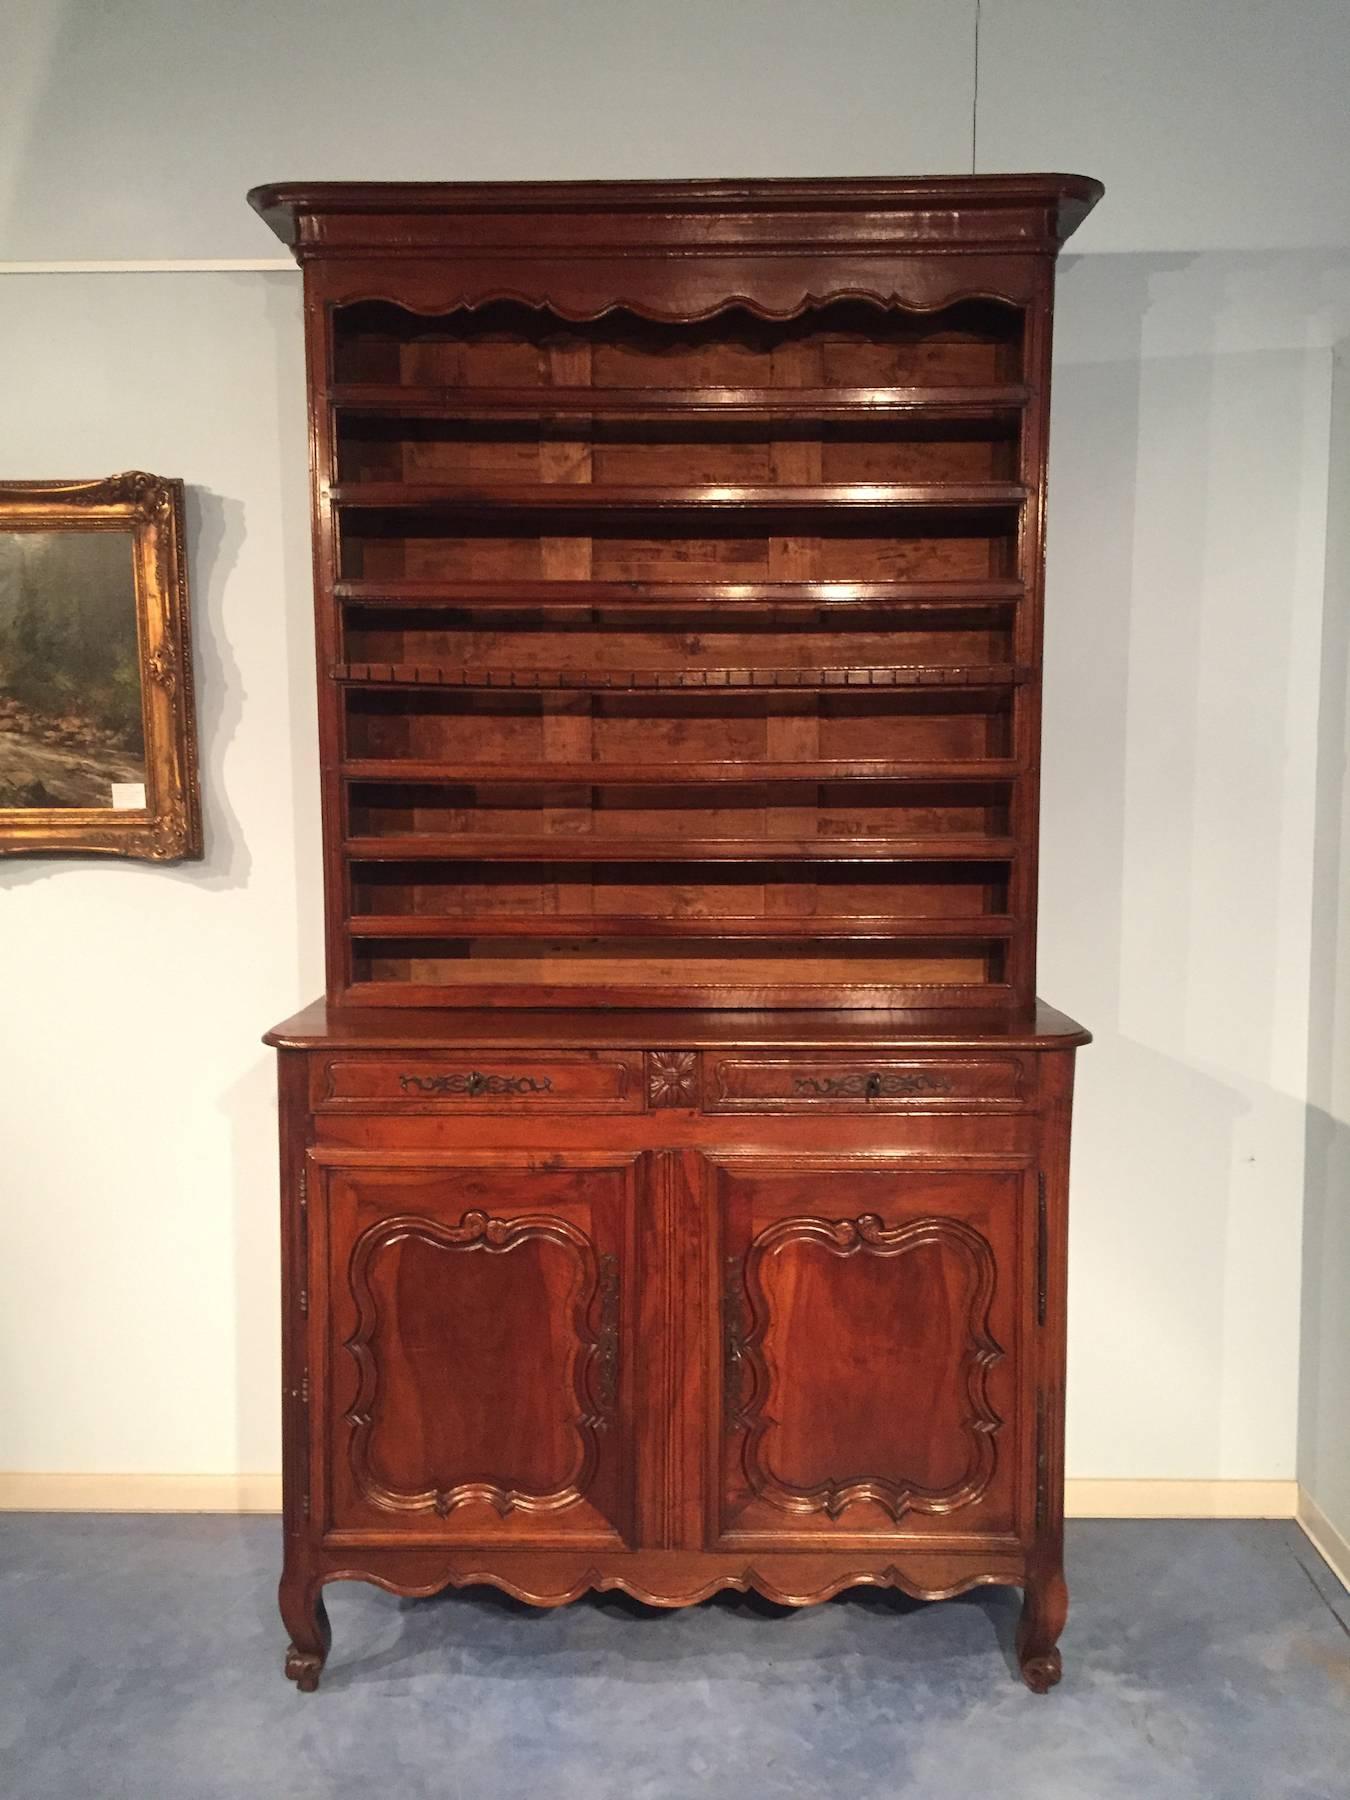 Beautiful 18th century French Louis XV walnut sideboard plate rack, original brass hinges, key escutcheon plates and pulls,
fine carved door, shaped apron, elegant front legs ending with scroll feet.
The piece is in very good condition with an